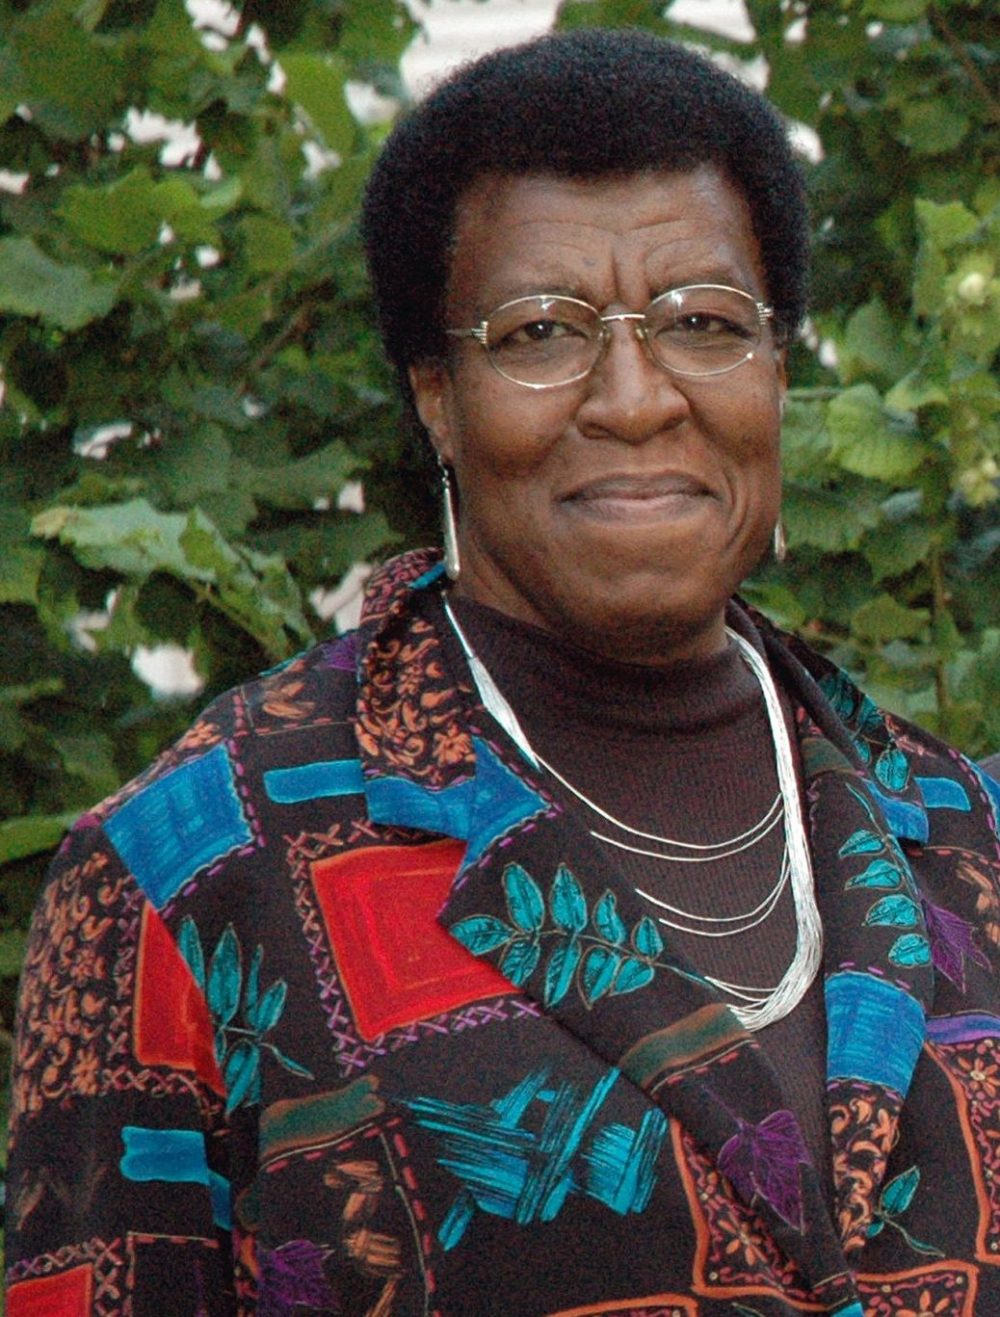 A portrait of author Octavia Butler, photographed outside against a green background. She smiles slightly, and has a short hairstyle, gold wire glasses, and a colorful shirt. 